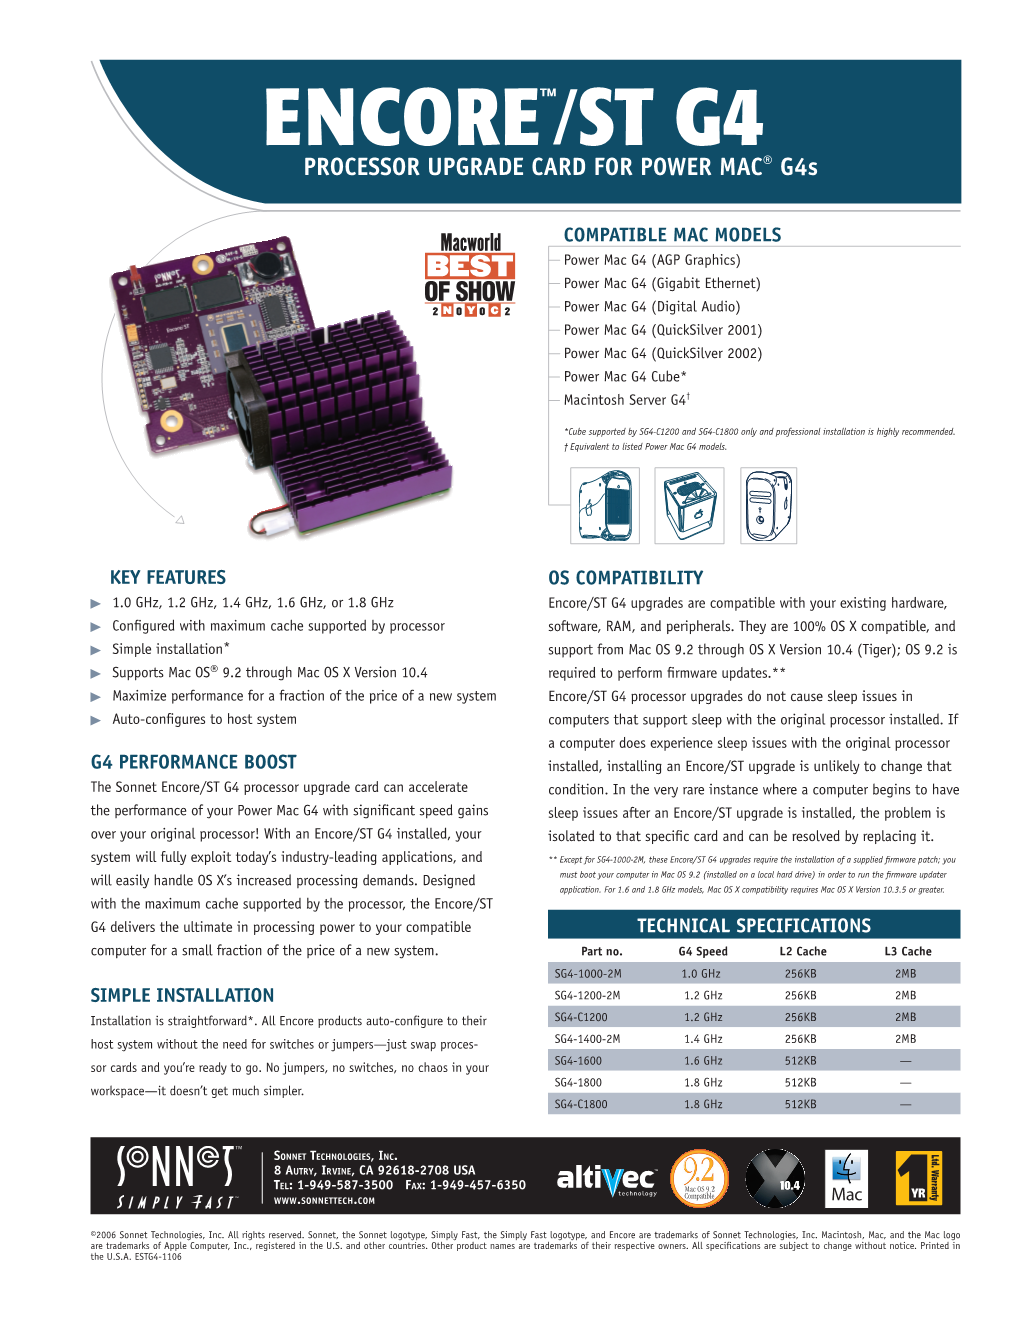 ENCORE™/ST G4 PROCESSOR UPGRADE CARD for POWER MAC® G4s